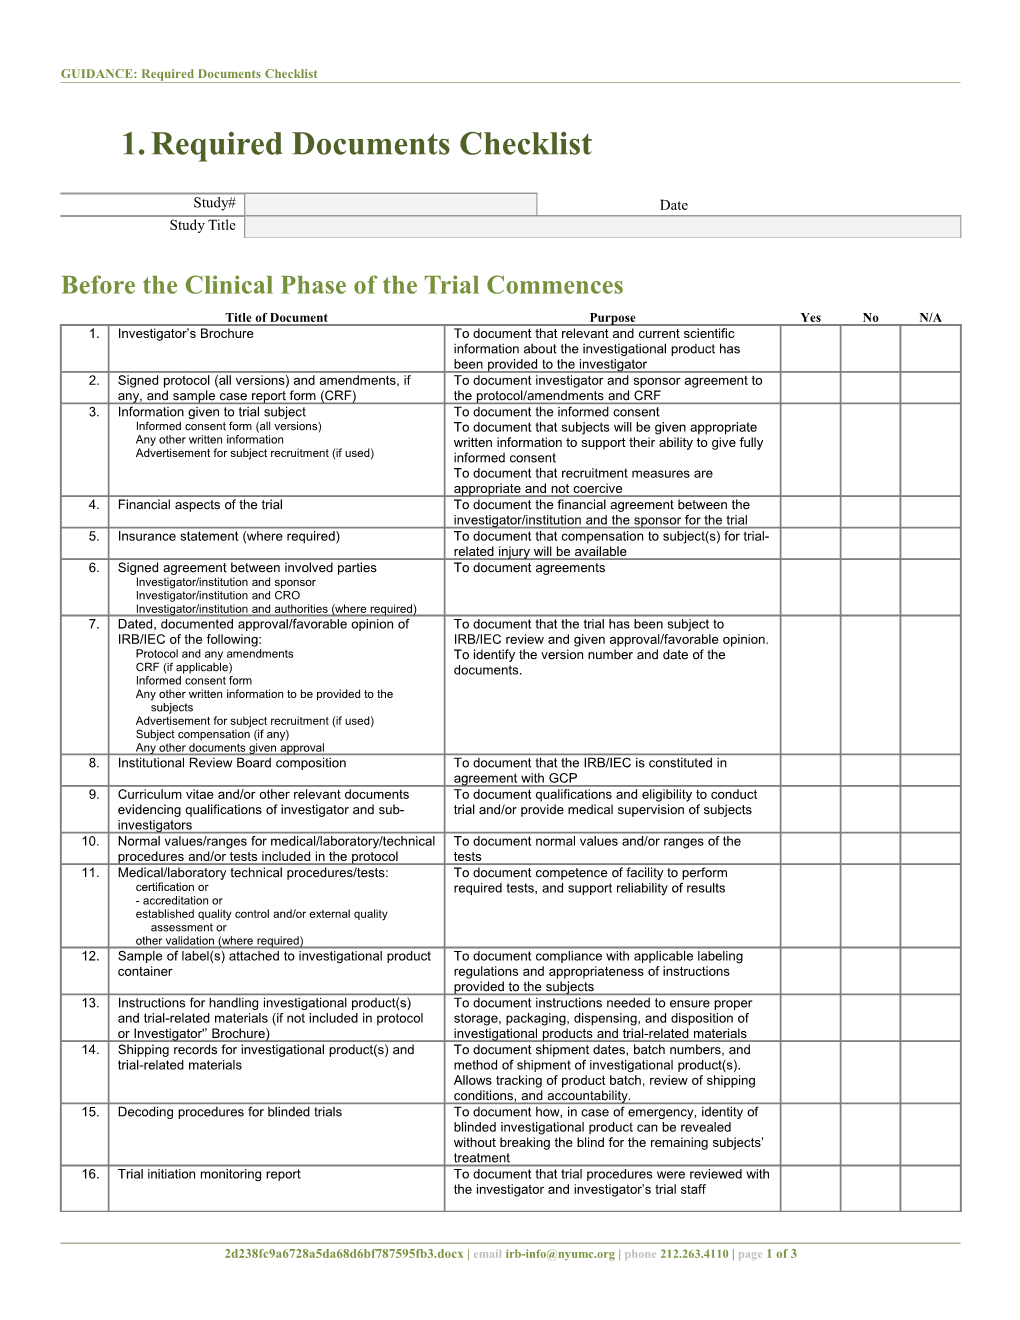 GUIDANCE: Required Documents Checklist